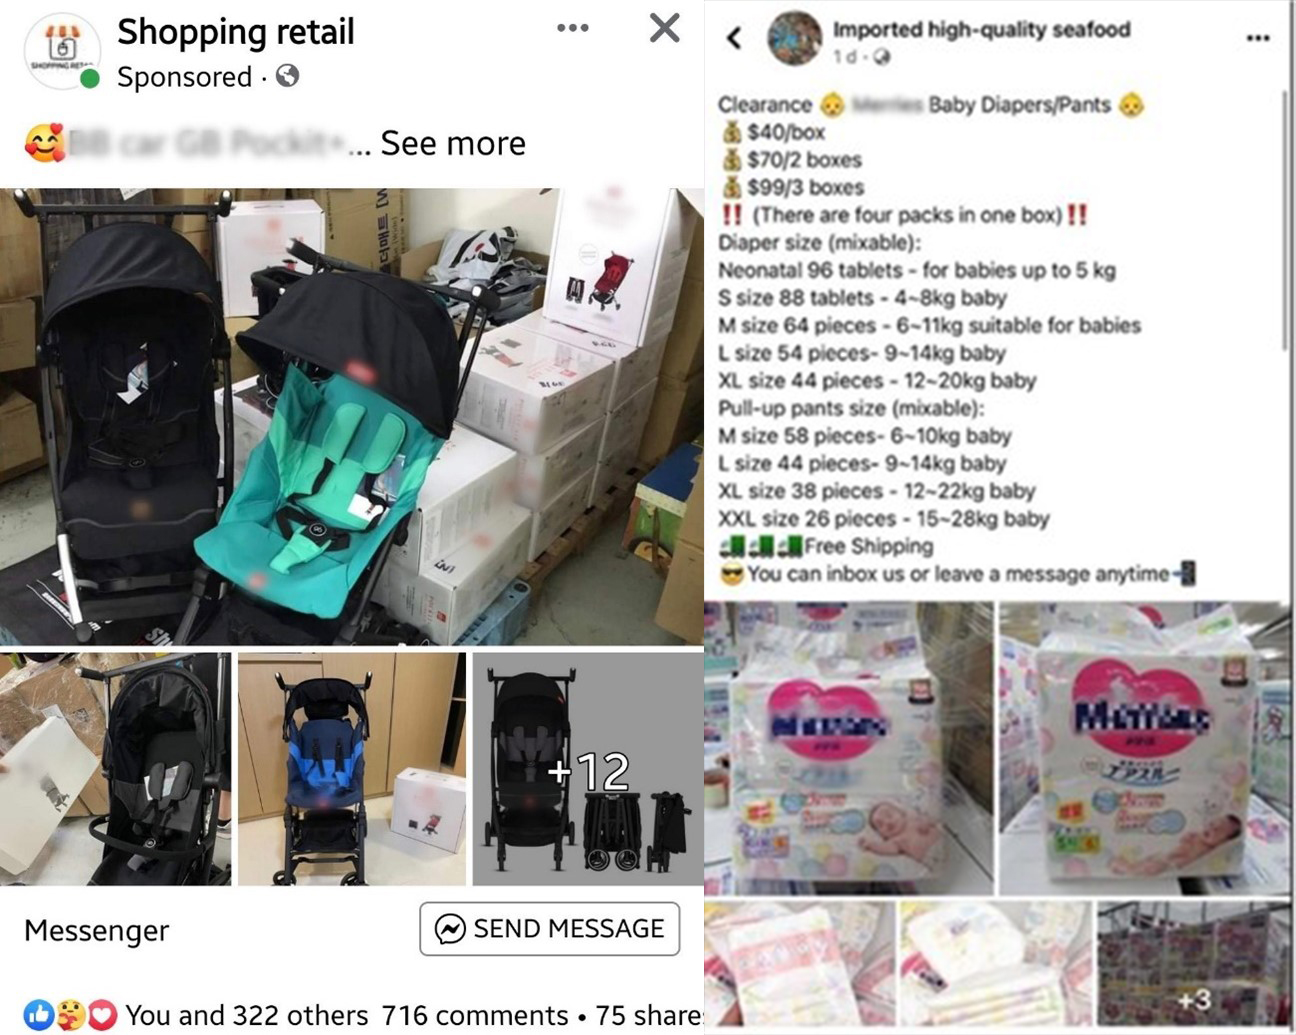 20230322_police_adv_on_resurgence_of_e_commerce_scams_involving_the_sale_of_baby_products_1